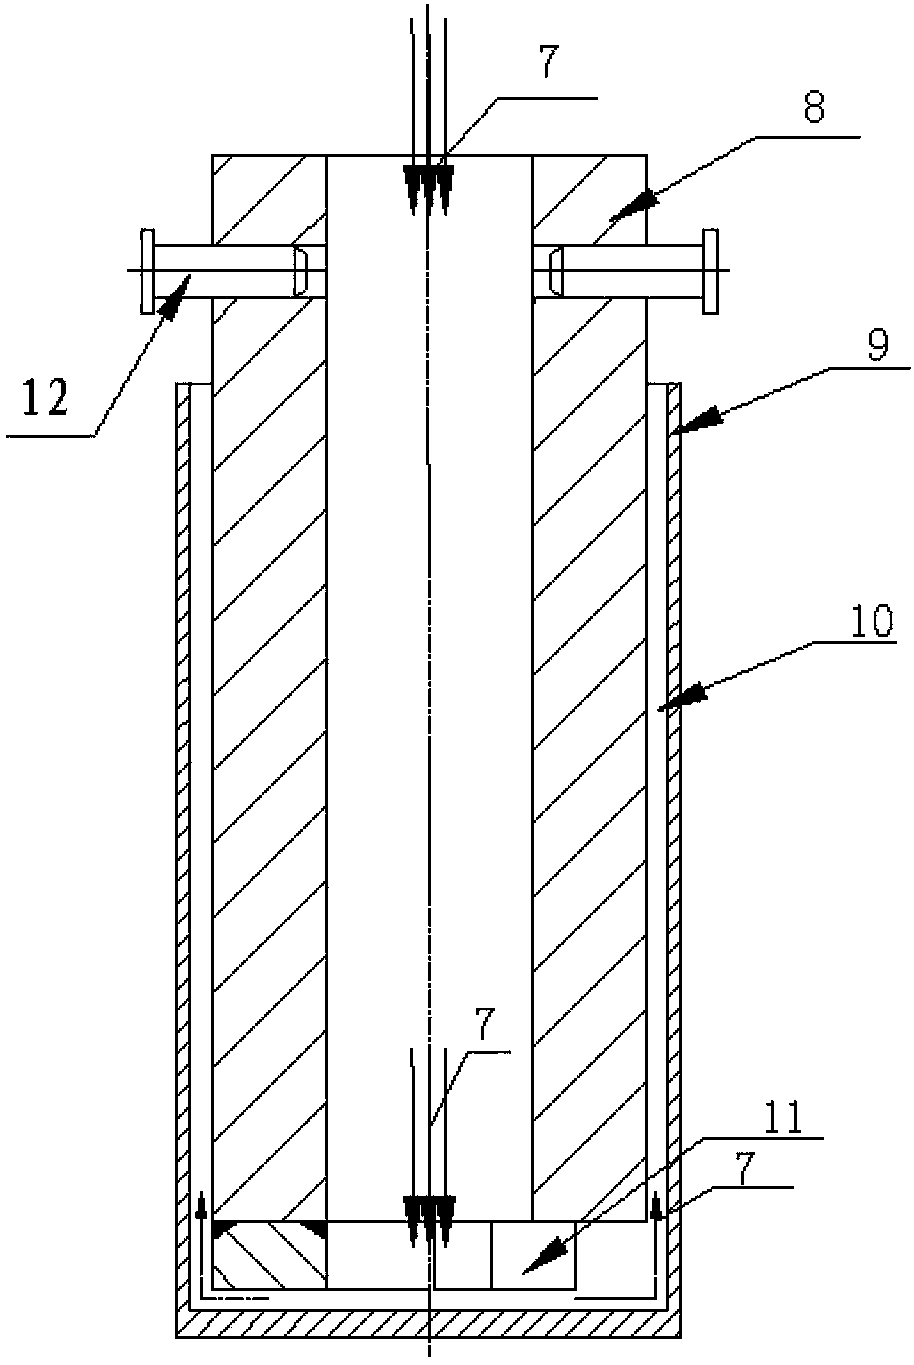 Method for manufacturing large hollow steel ingots by forced cooling with single sleeves